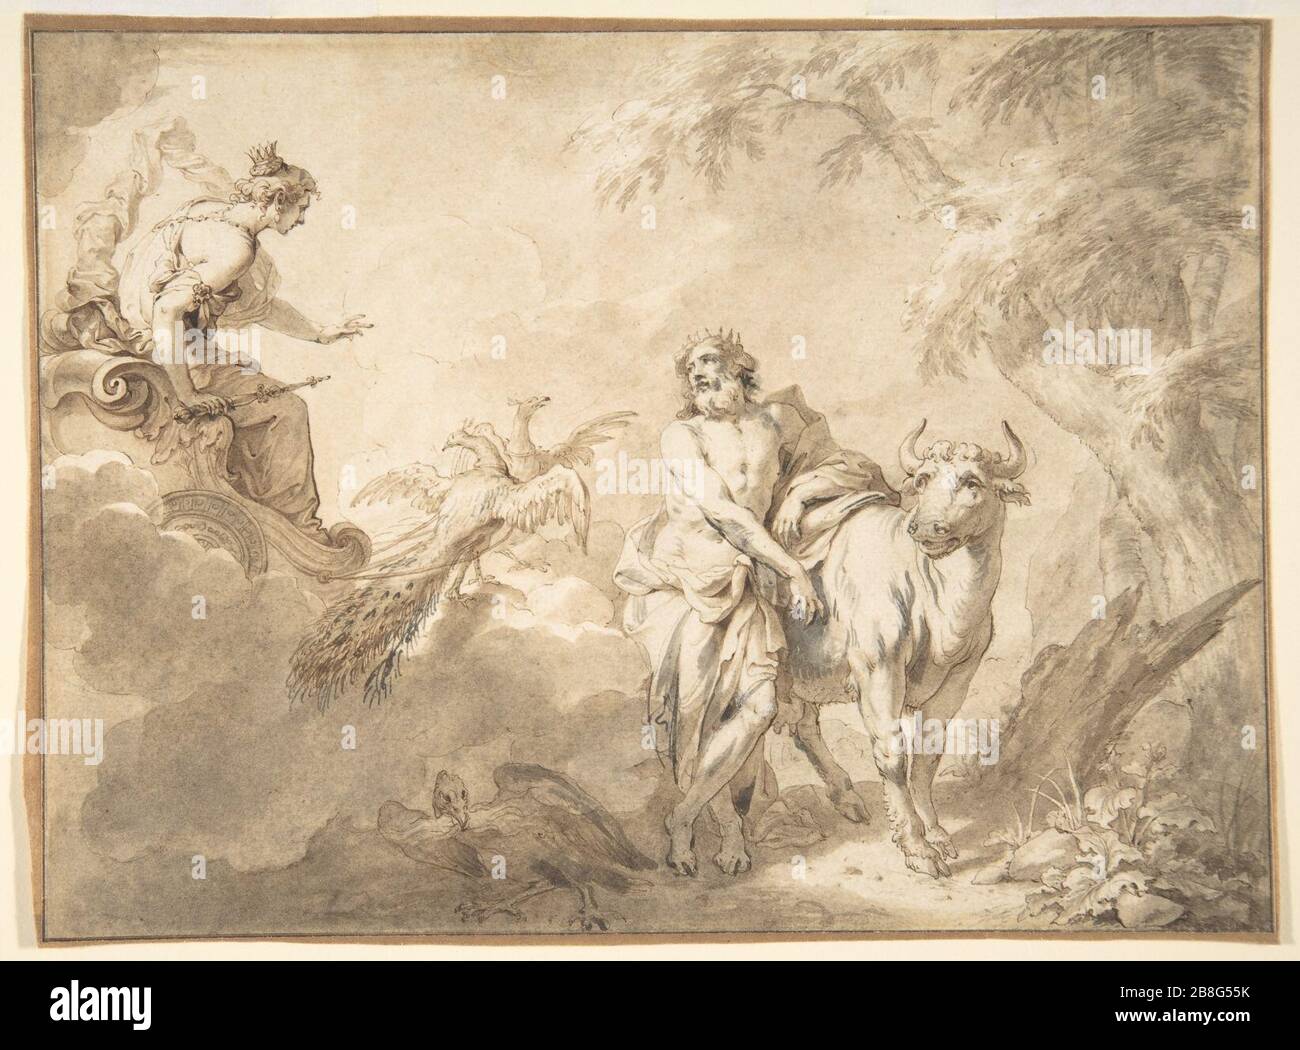 Godfried Maes - Illustrations to the Metamorphoses of Ovid, Jupiter and Io (1). Stock Photo